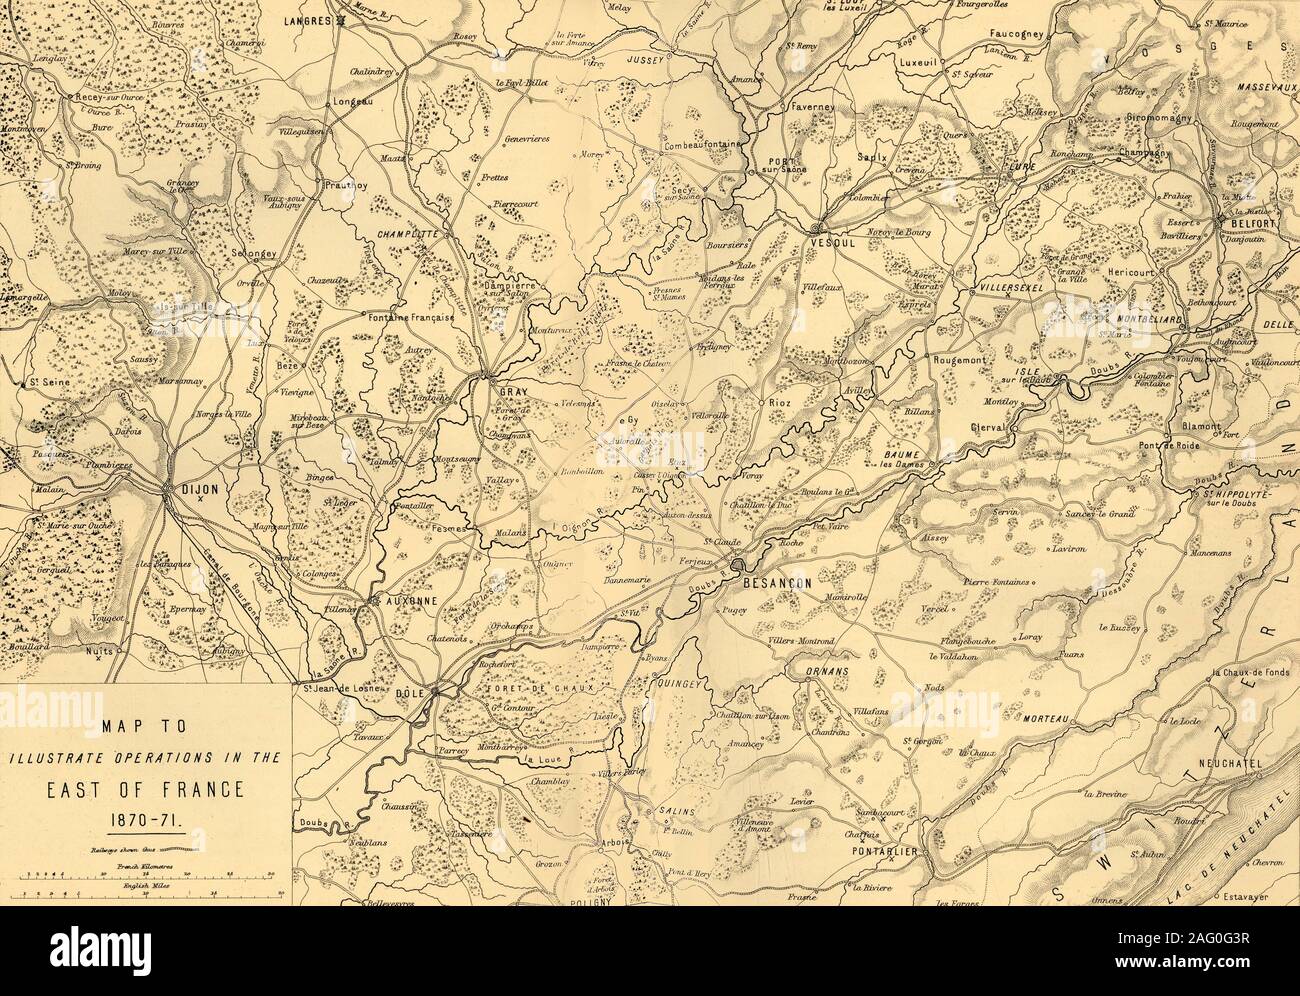 'Map to Illustrate Operations in the East of France 1870-71', (c1872). Map: 'Drawn under the Superintendence of Captain Hozier', showing the towns of Dijon and Besan&#xe7;on. From &quot;The Franco-Prussian War: its causes, incidents and consequences&quot;, Volume II, by Captain H M Hozier. [William Mackenzie, London, 1872] Stock Photo